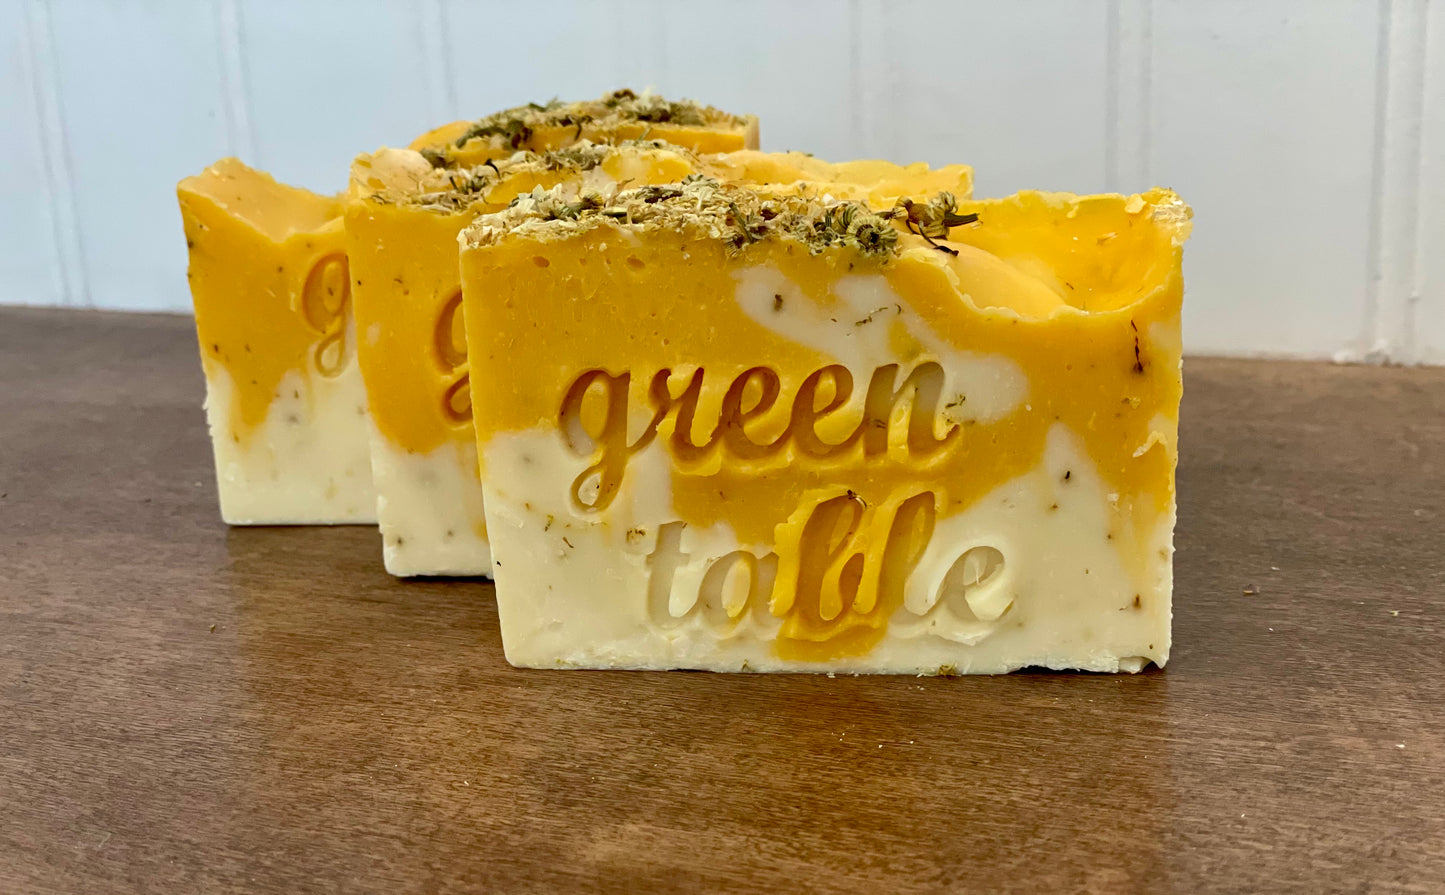 Steep & Relax Chamomile Soap